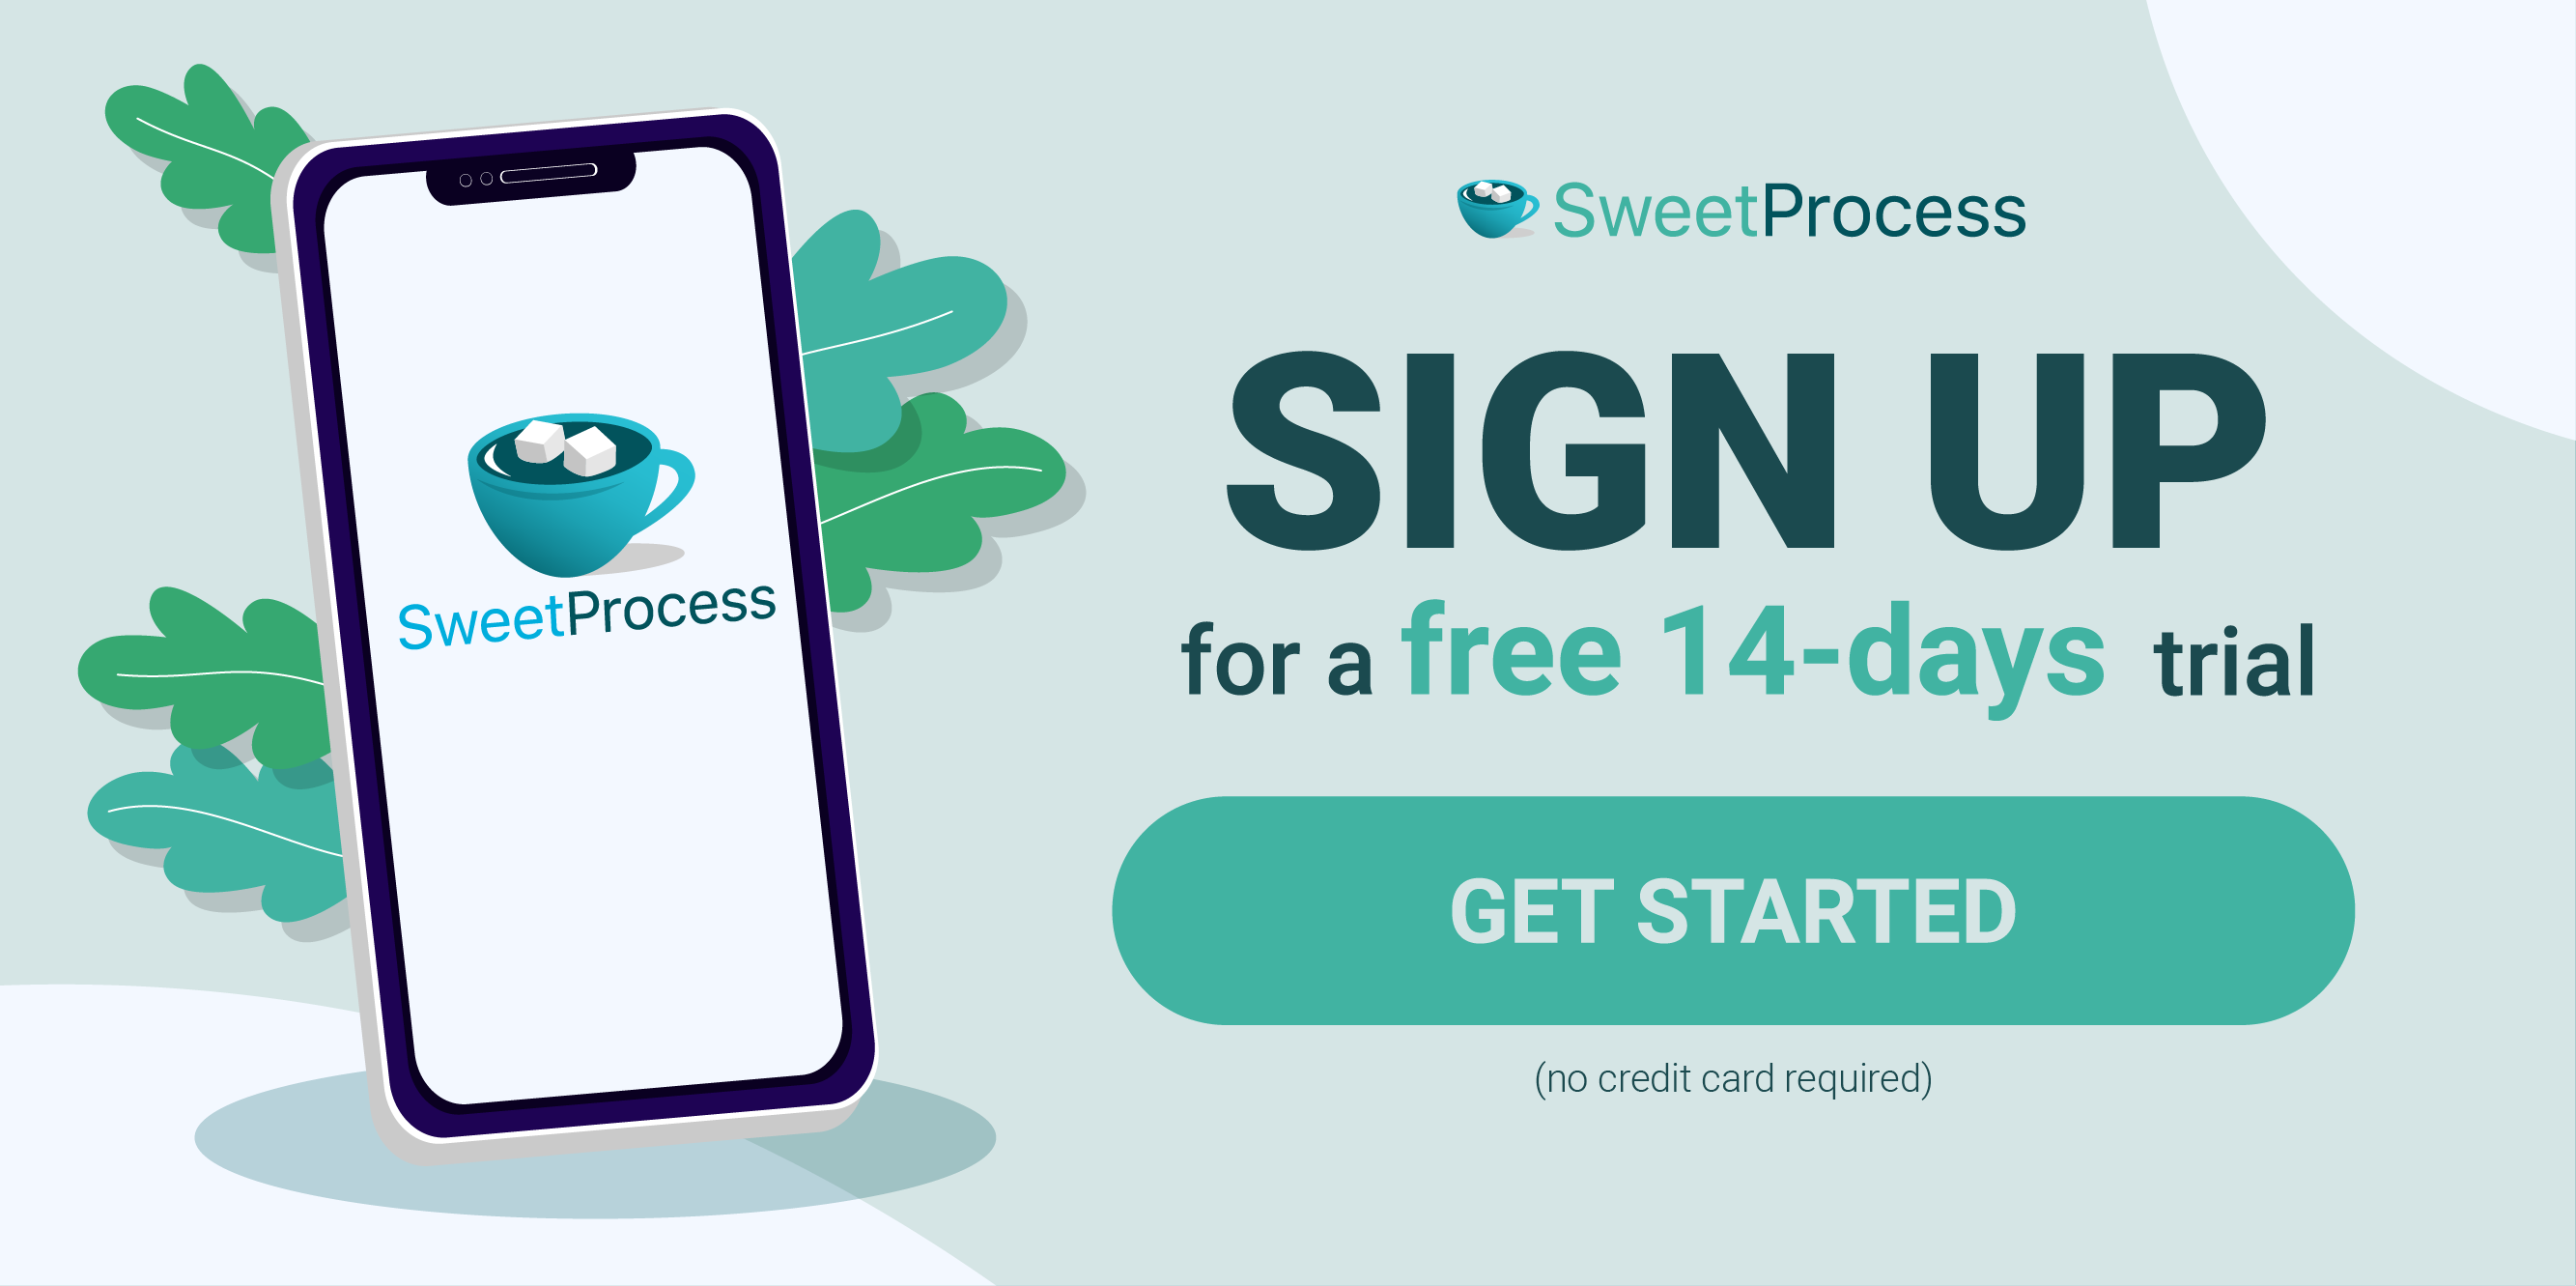 Sign Up for a free 14-days trial